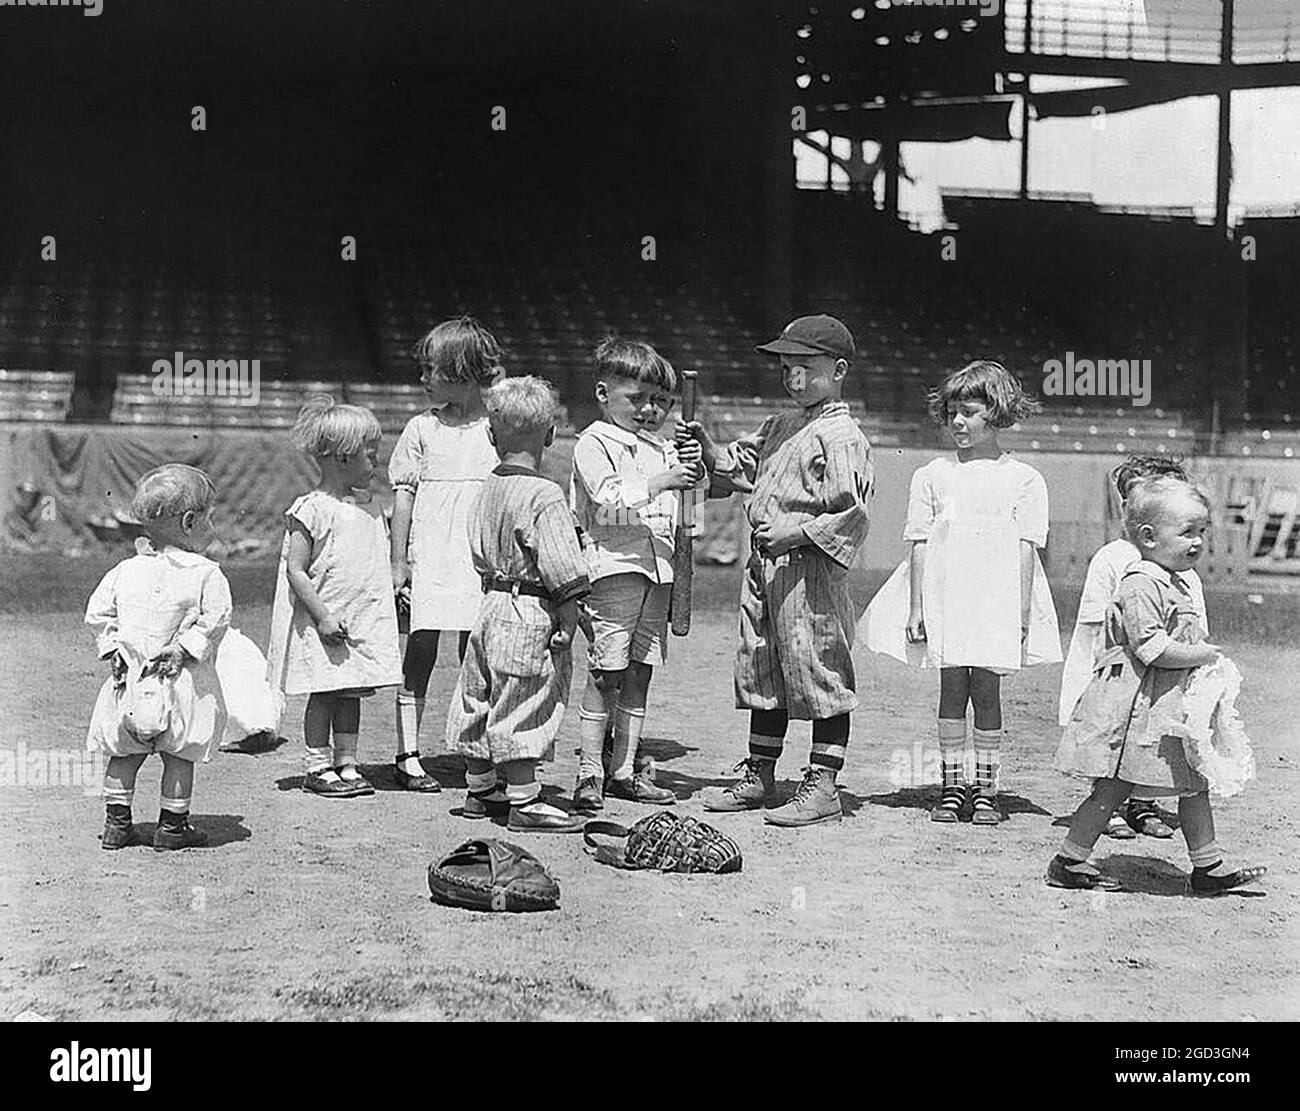 Spectators Pictured fanning the Flames of Baseball Passion, young boys and girls on the baseball field at a major league stadium between 1910 and 1930 Stock Photo